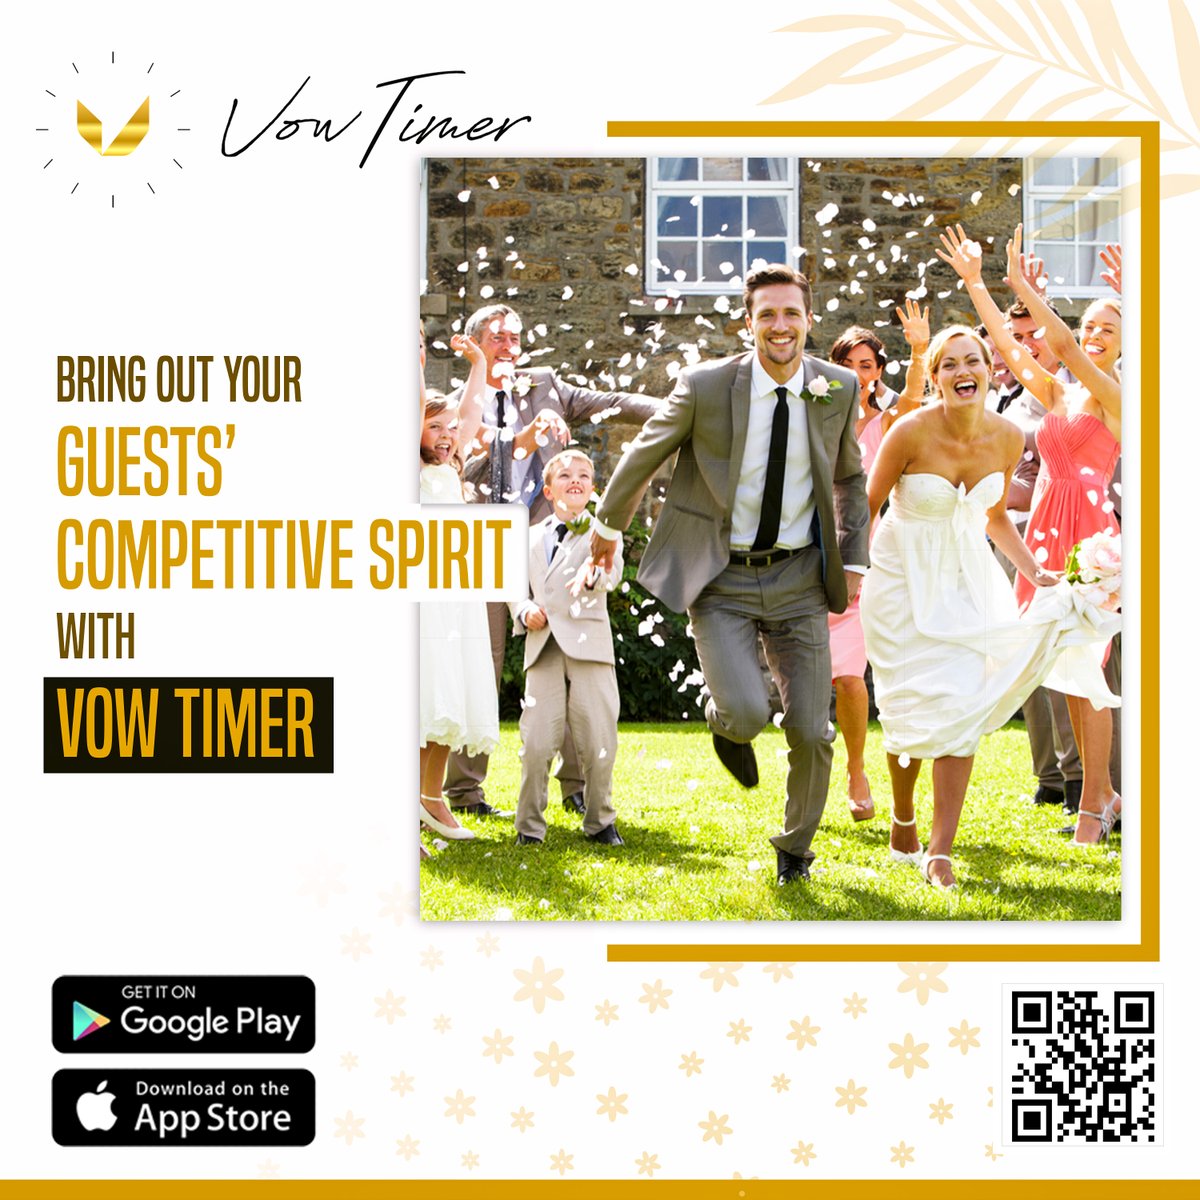 Cheer up your wedding guests and bring in the competitive spirit with Vow Timer. Install Now!

For Android: play.google.com/store/apps/det…
For IOS: apps.apple.com/us/app/vow-tim…

#weddingplanner #bridetobe #weddinginspo #weddingplanning #uniquewedding  #americanwedding #vowtimer